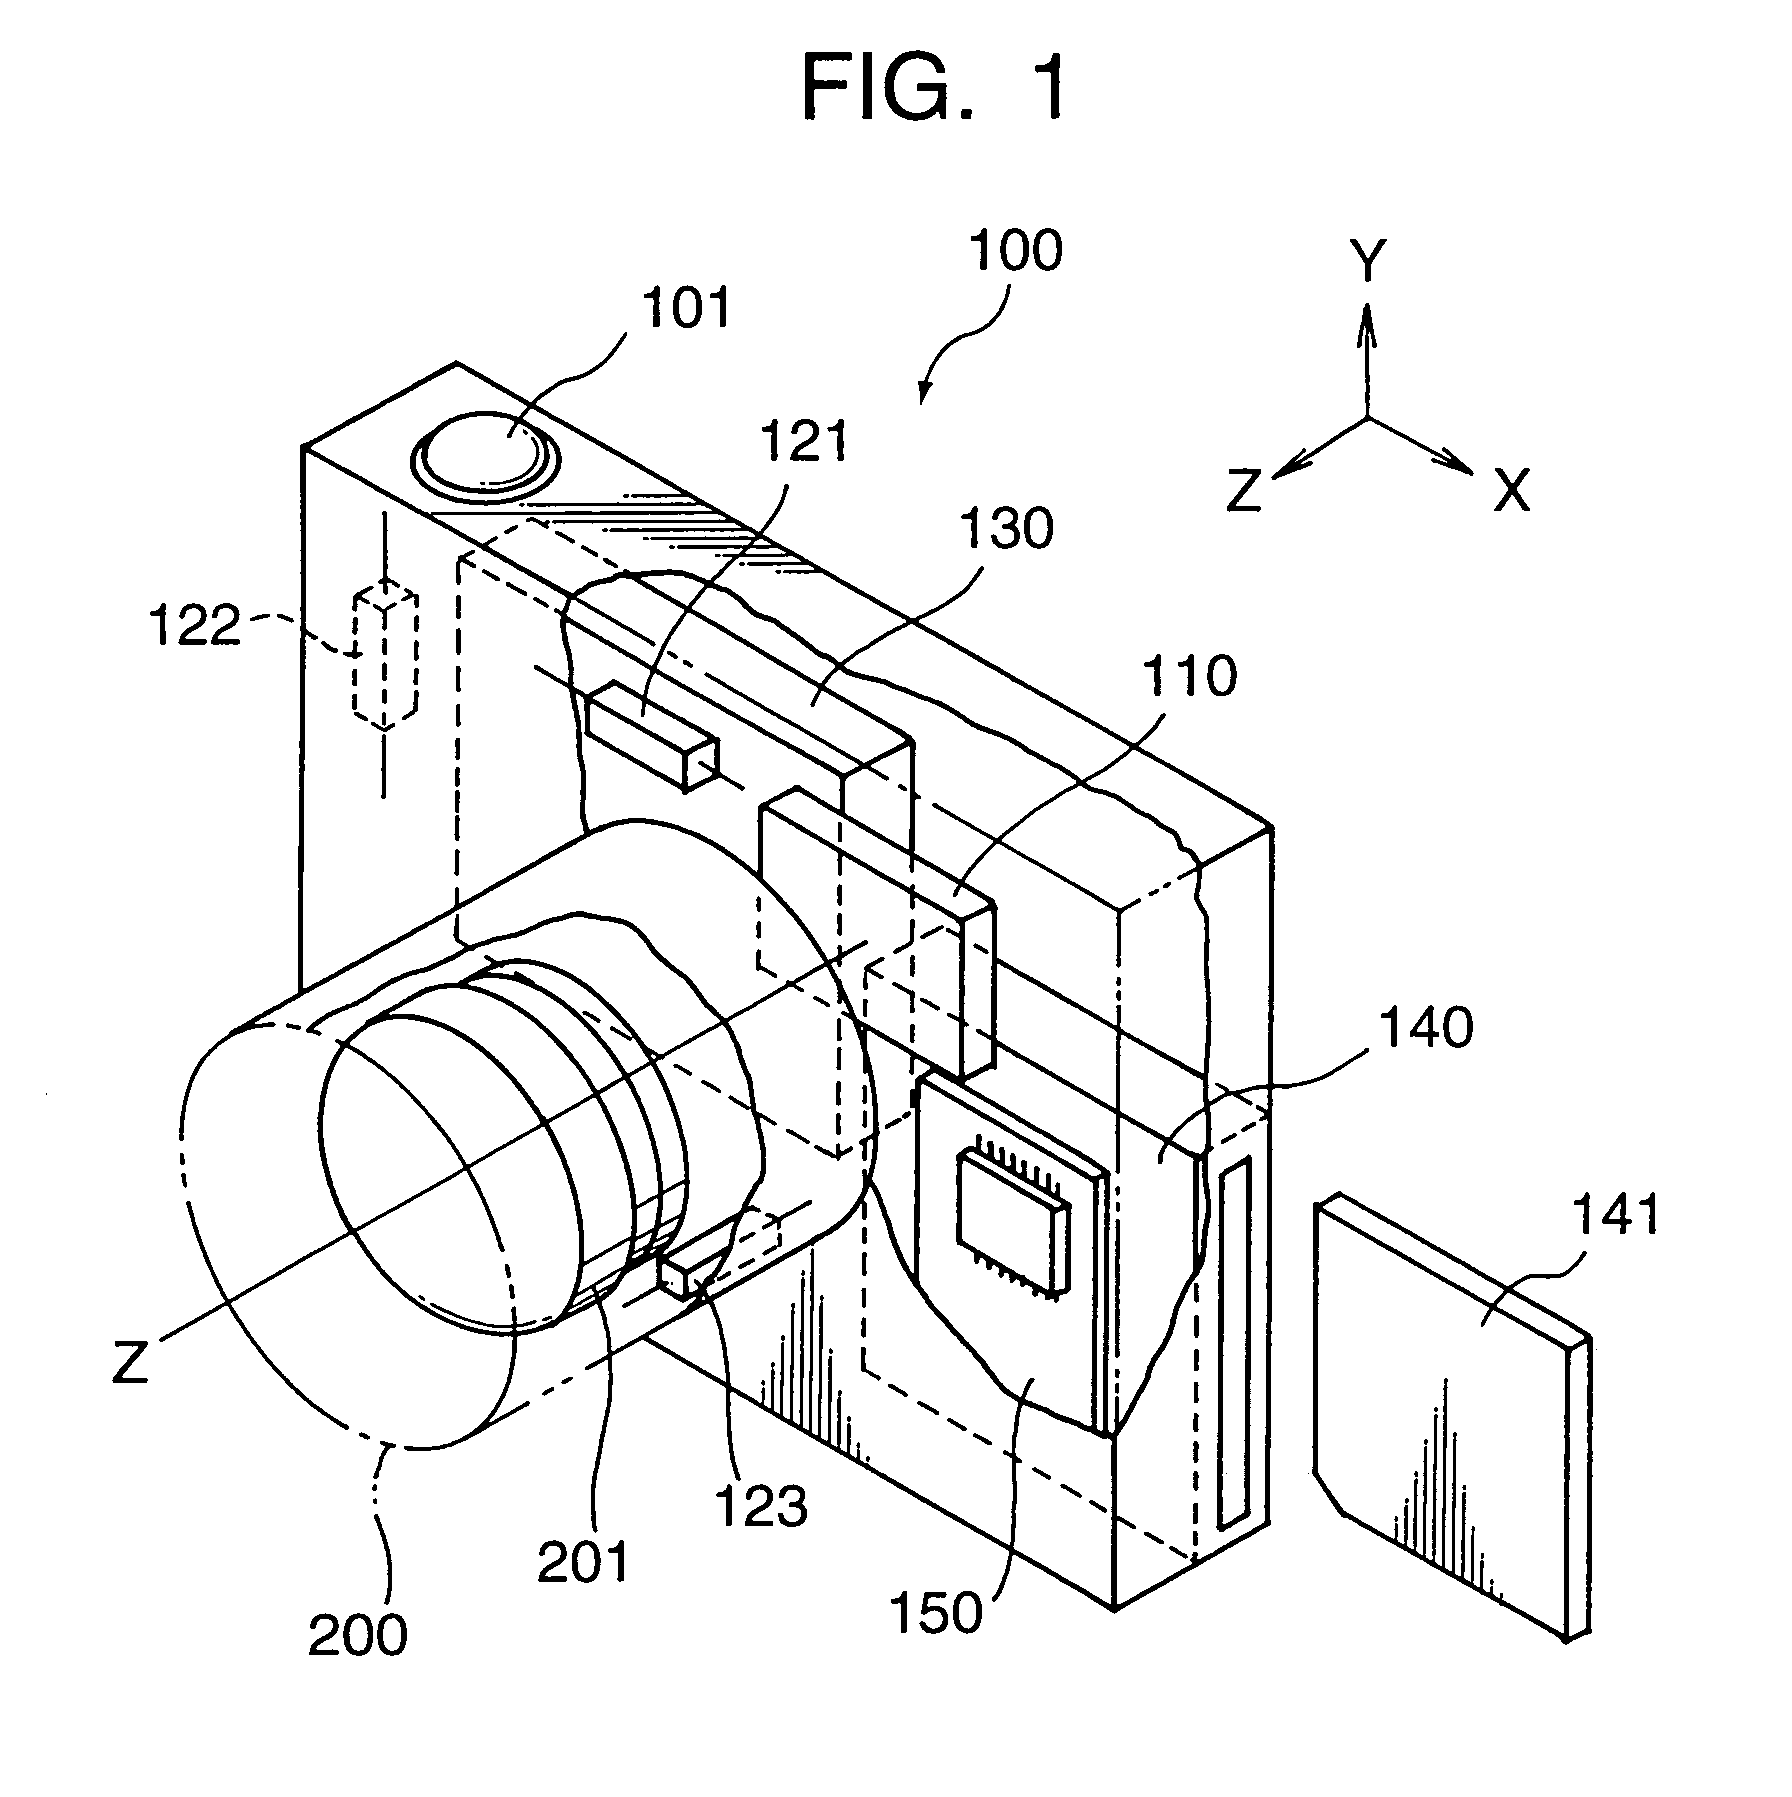 Camera system that compensates low luminance by composing multiple object images